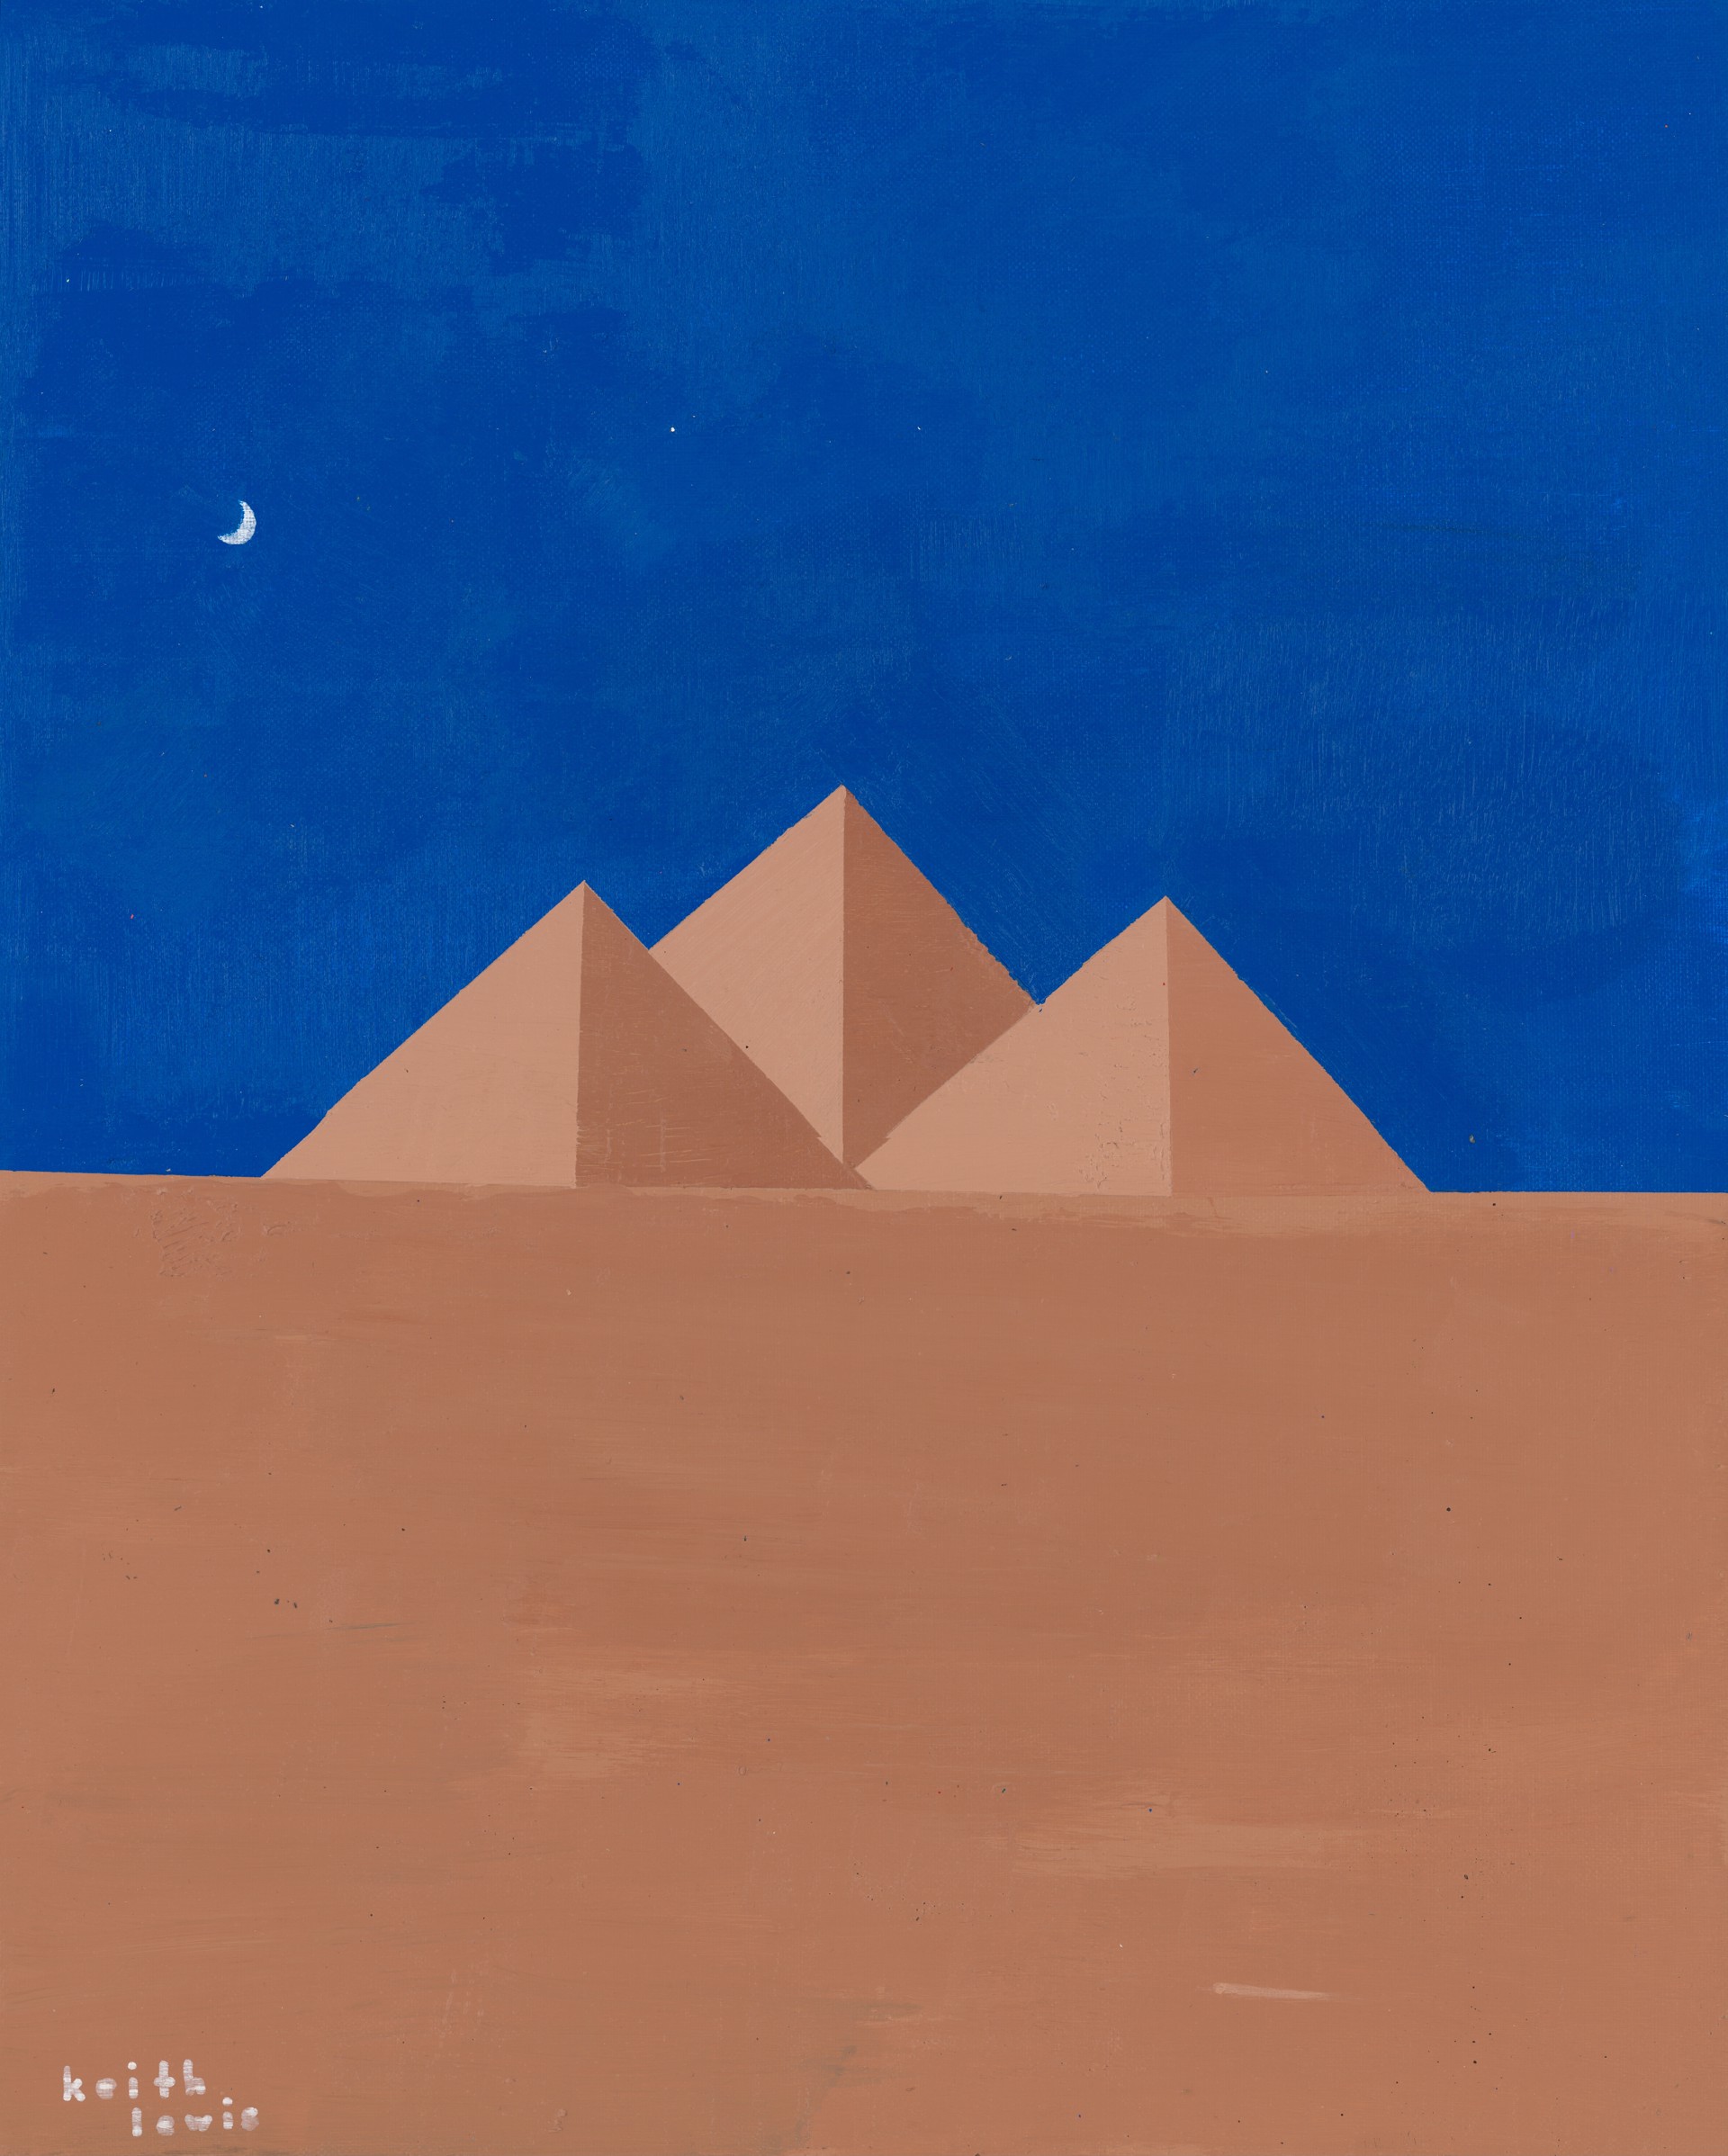 Egyptian Pyramids by Keith Lewis